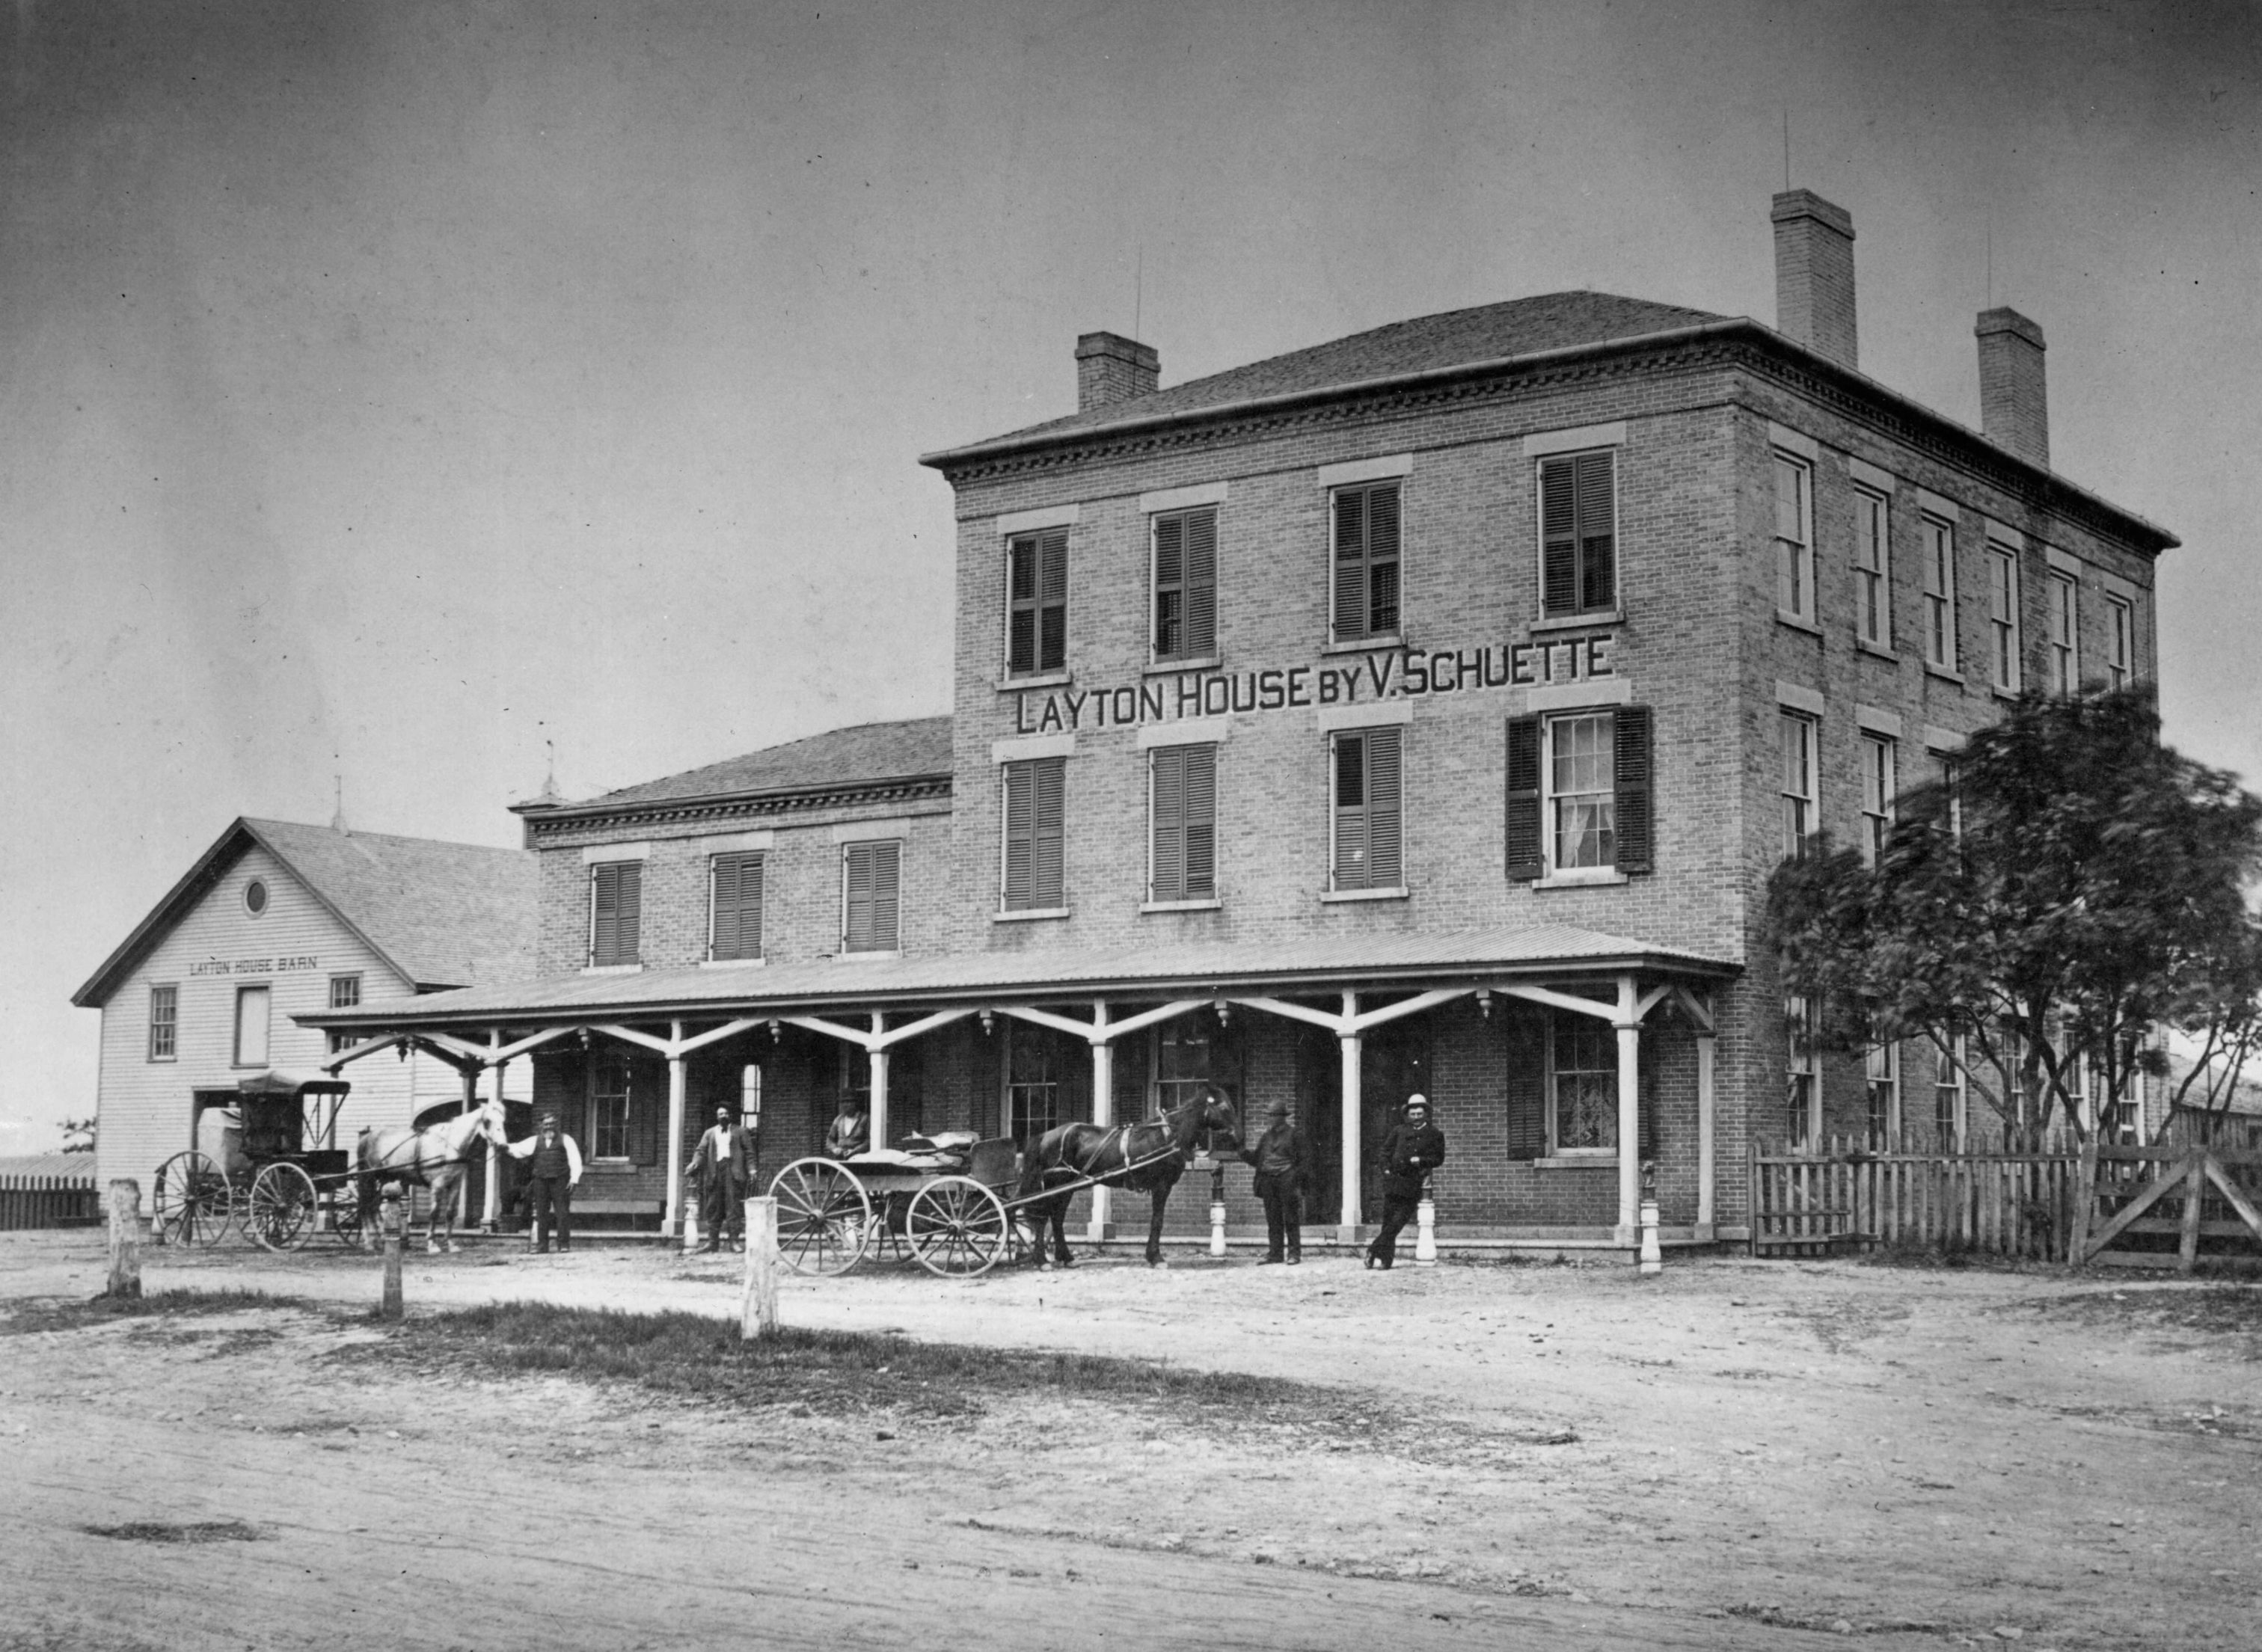 The Layton House, built in 1848, served travelers through what is now Hales Corners in the nineteenth century, shown in this photograph from 1880.